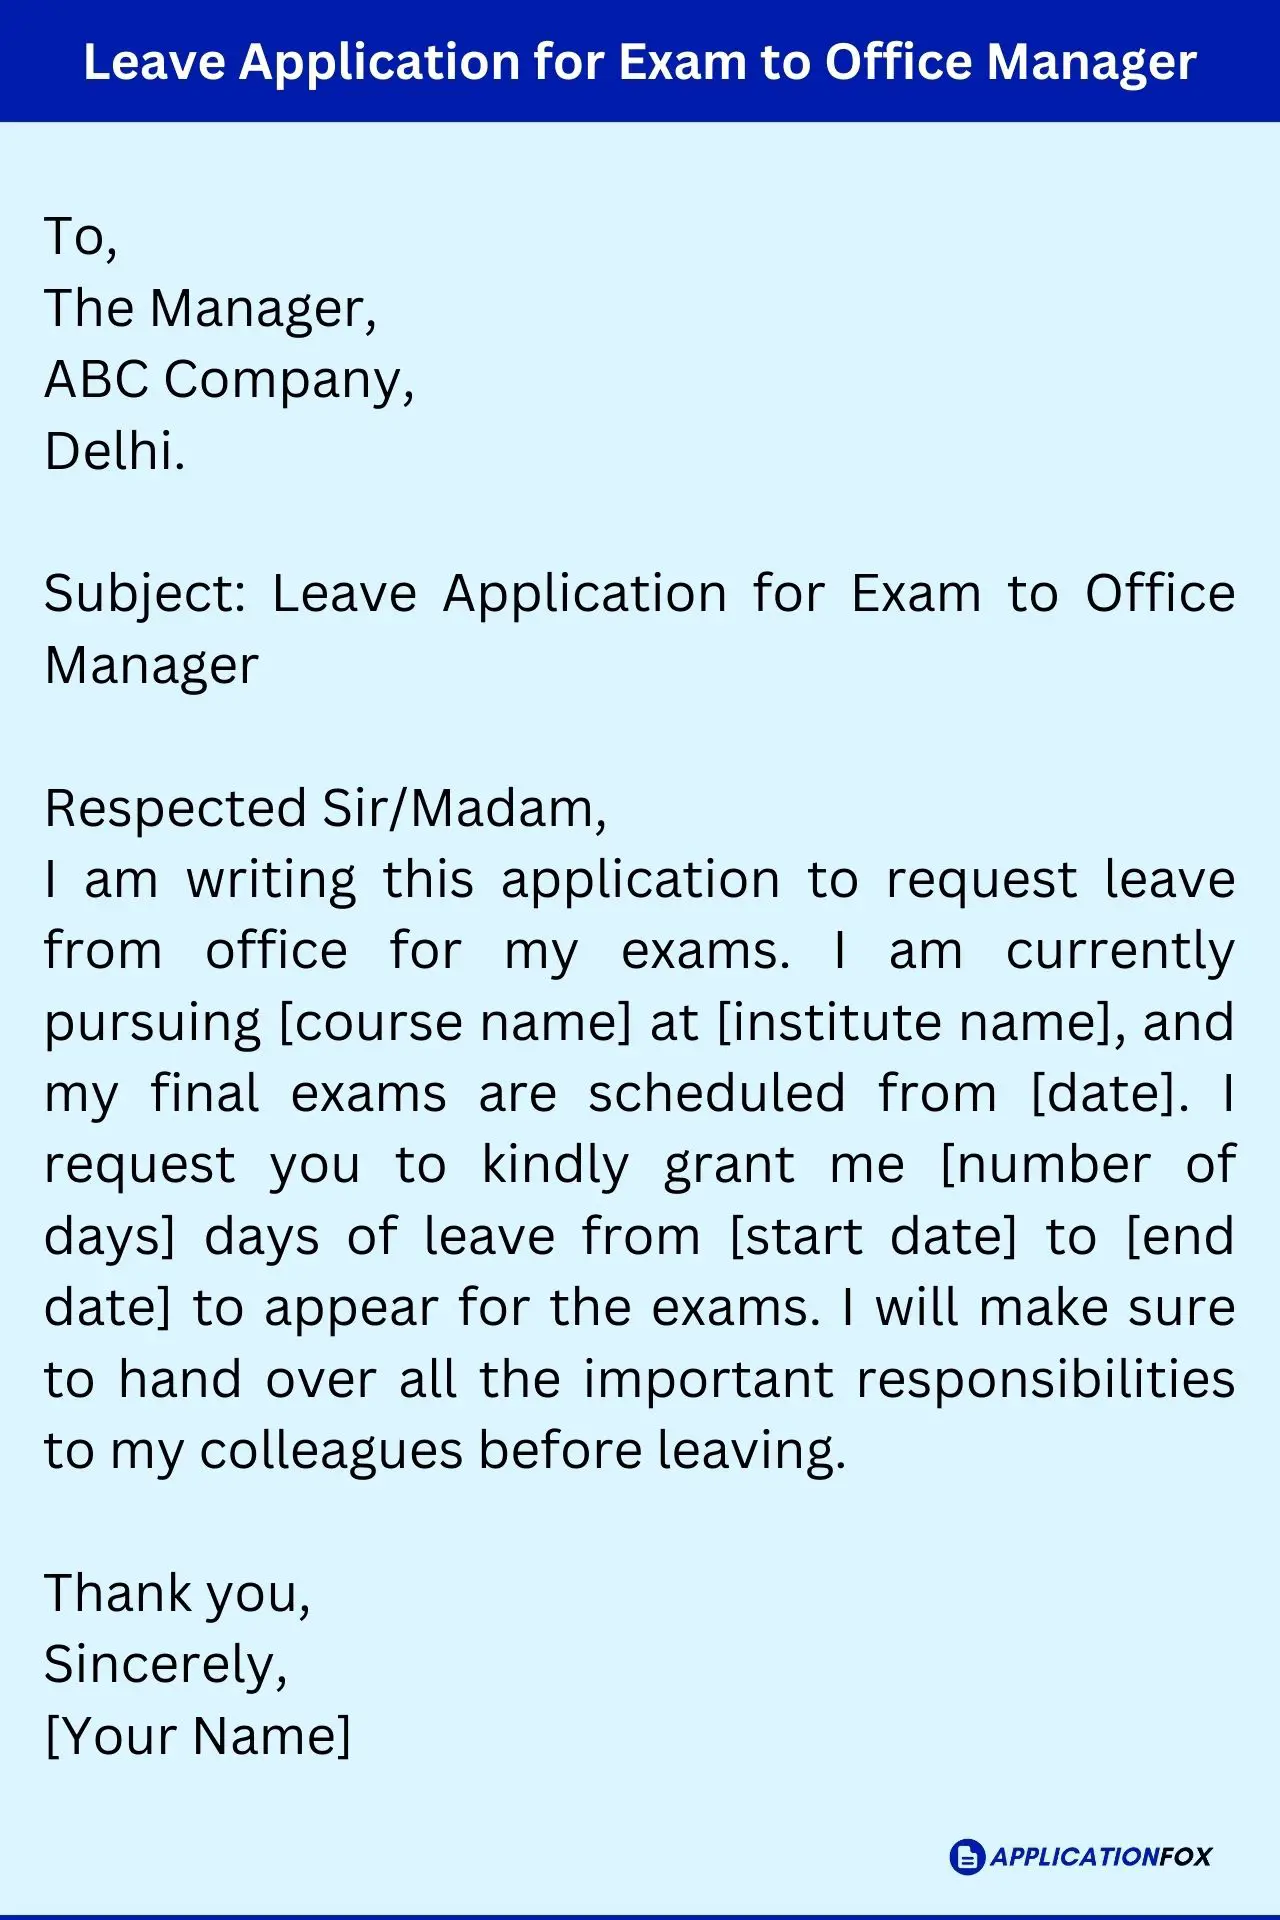 Leave Application for Exam to Office Manager